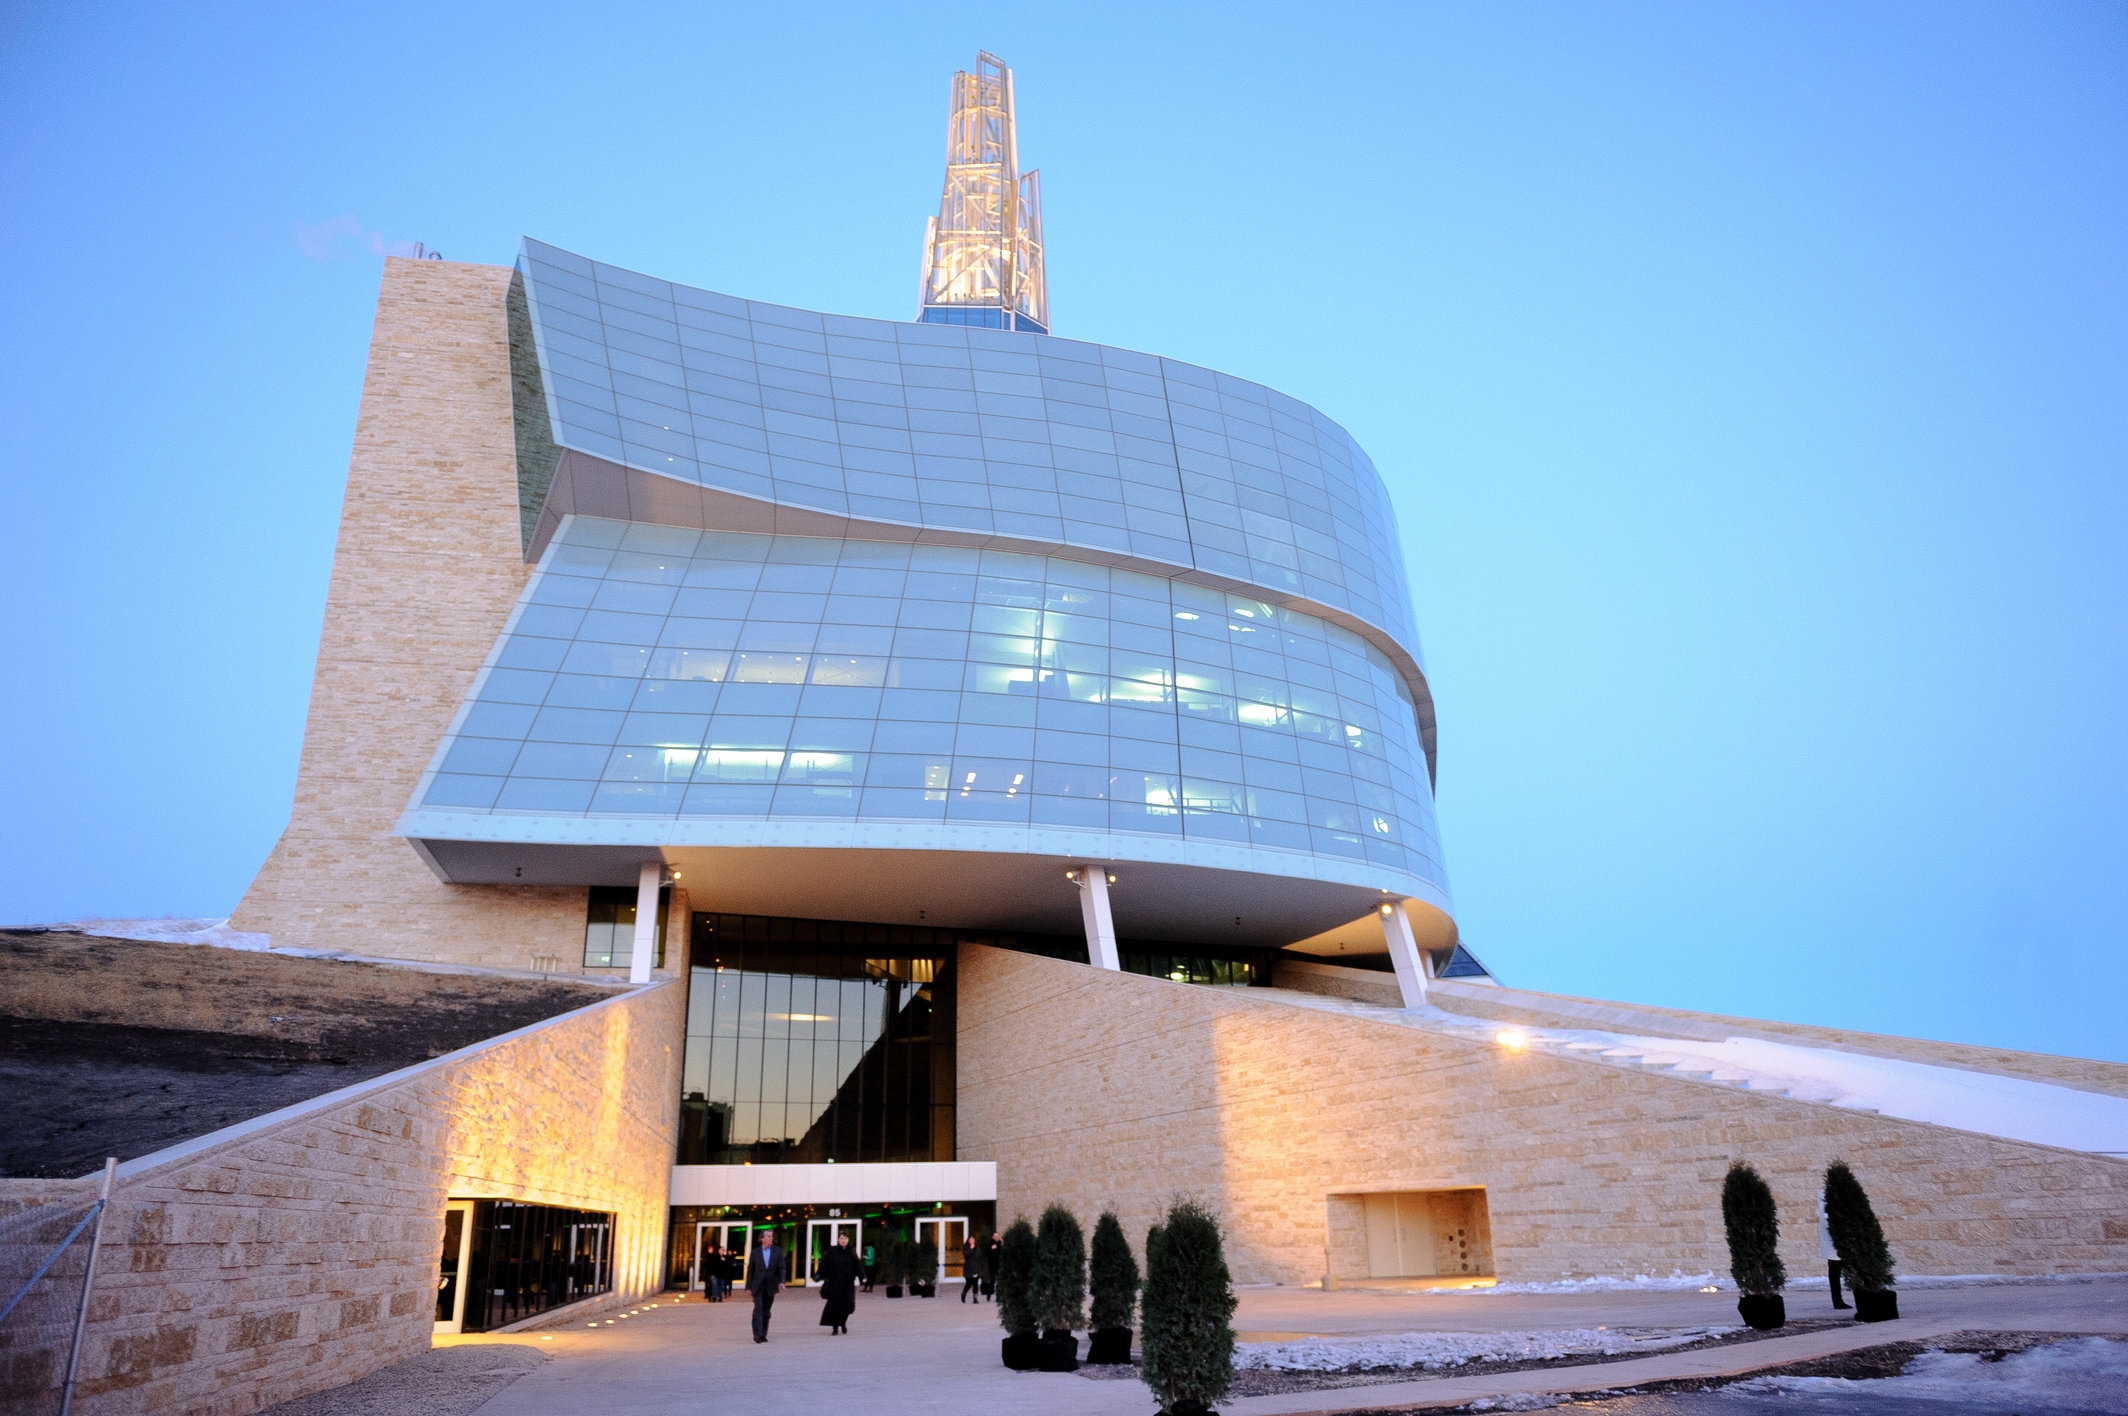 The Canadian Museum for Human Rights: Welcome to museum 3.0